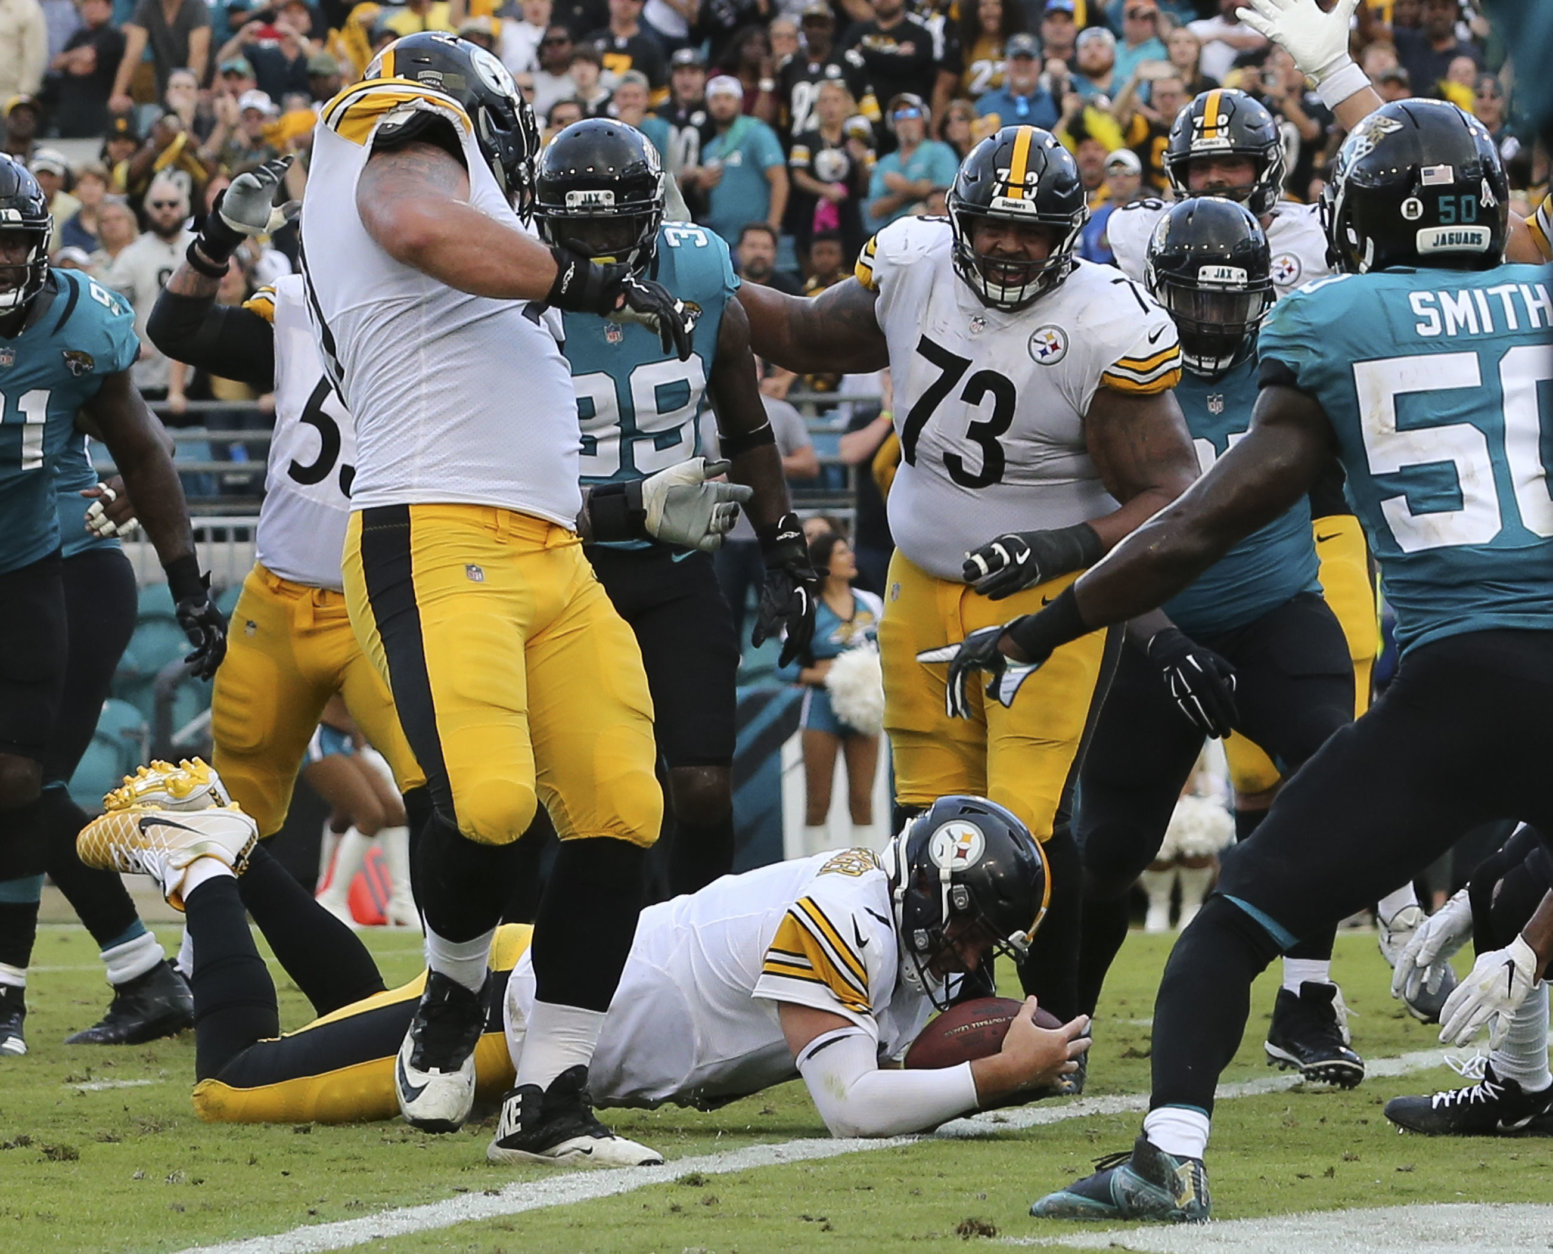 Pittsburgh Steelers quarterback Ben Roethlisberger dives over the goal line for the go ahead touchdown in front of Jacksonville Jaguars outside linebacker Telvin Smith, right, during the final seconds of an NFL football game, Sunday, Nov. 18, 2018, in Jacksonville, Fla. (AP Photo/Gary McCullough)